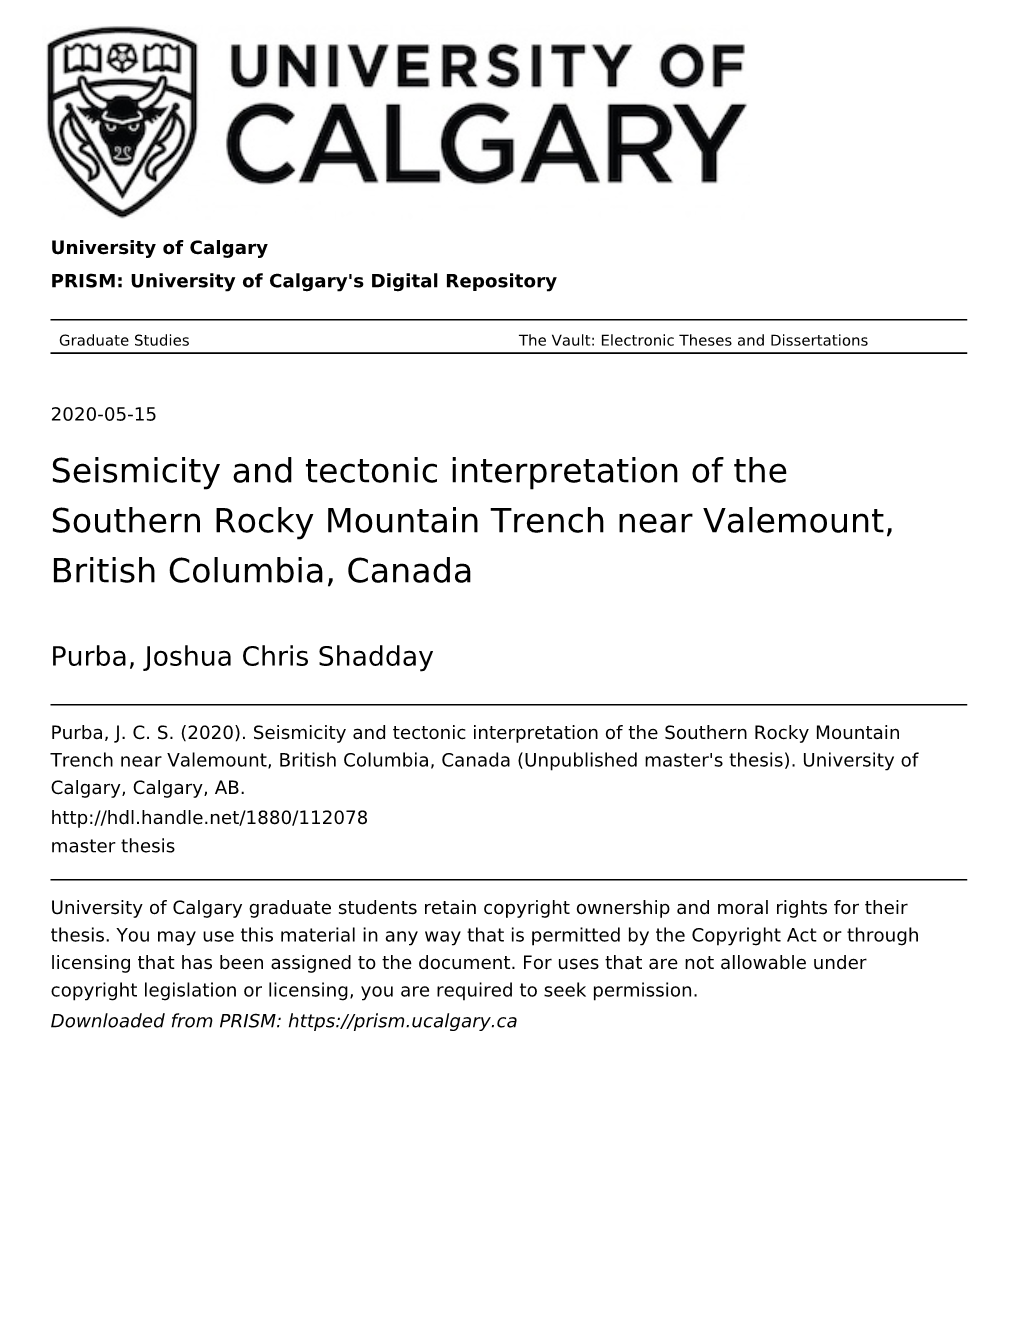 Seismicity and Tectonic Interpretation of the Southern Rocky Mountain Trench Near Valemount, British Columbia, Canada